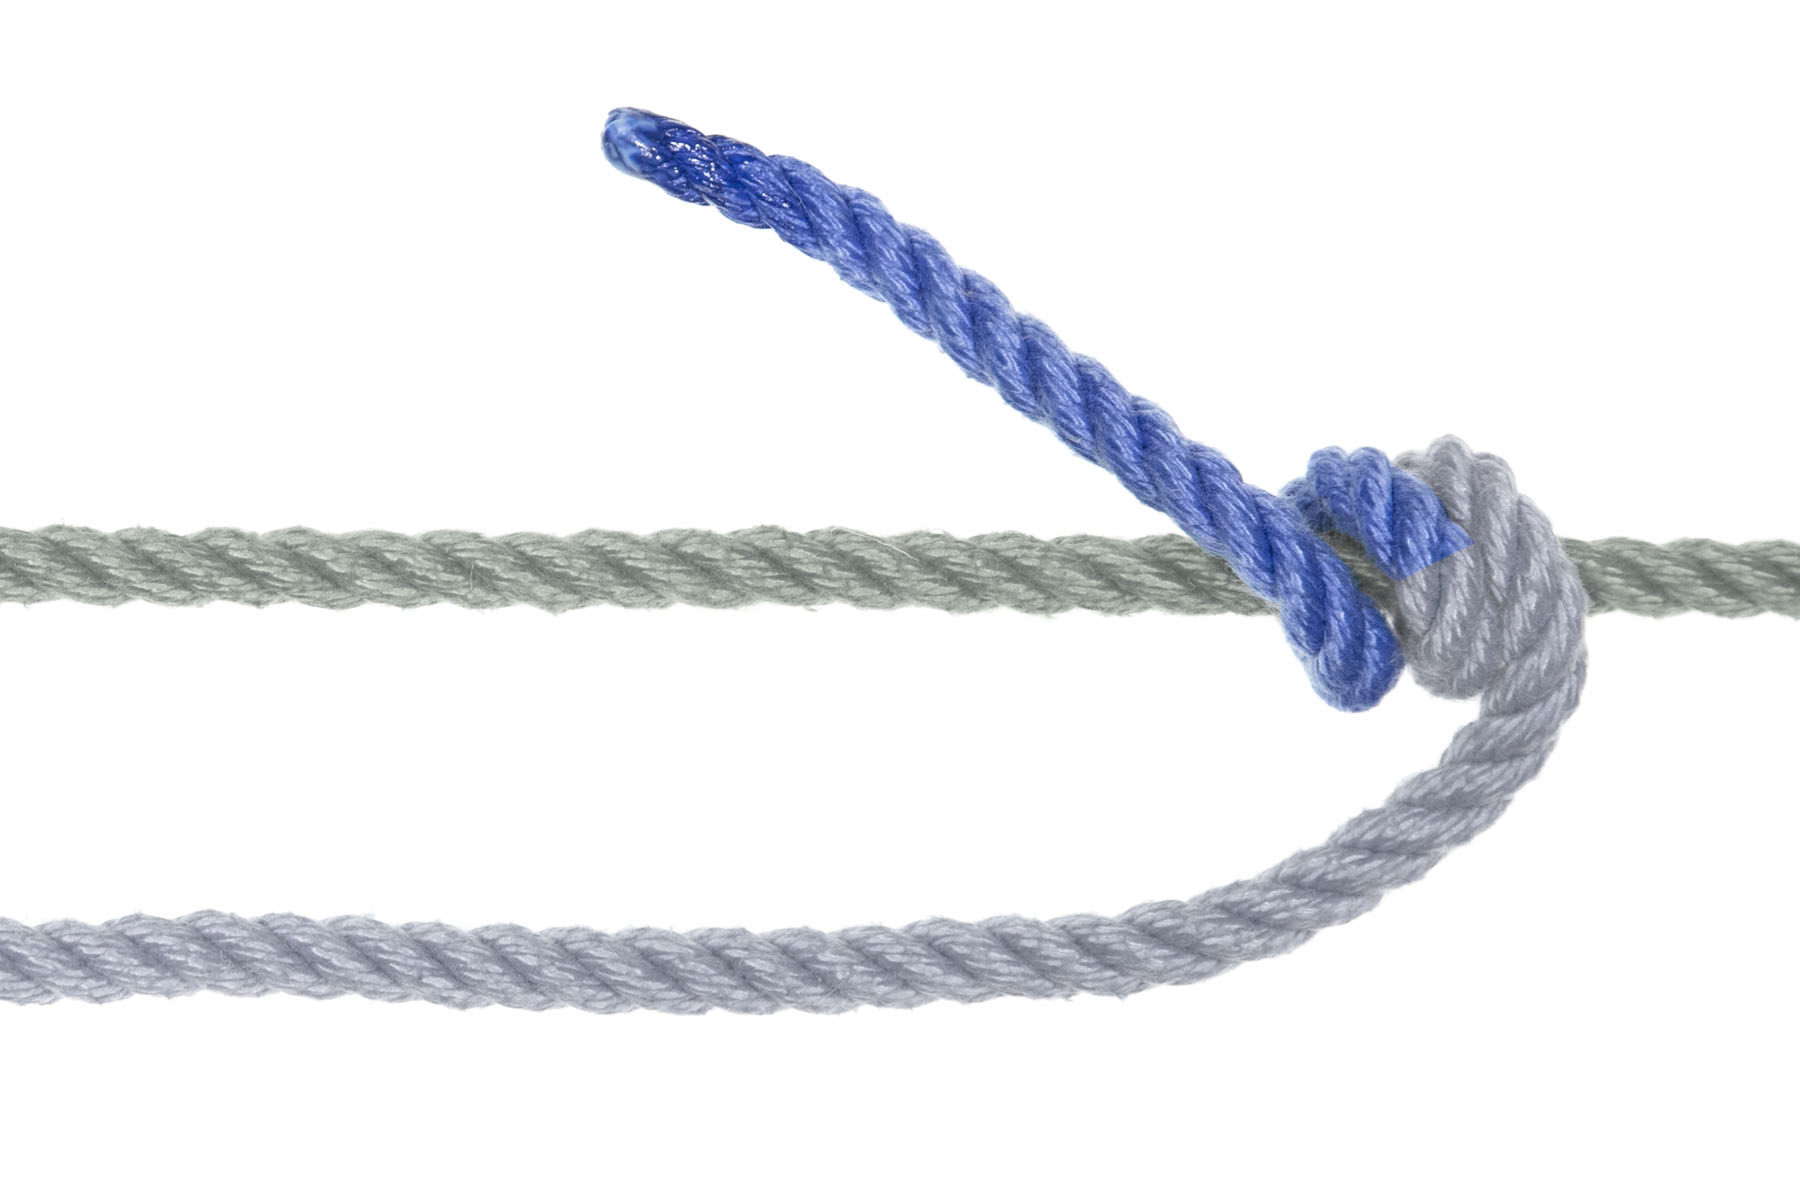 The blue rope makes a second spiral around the green rope, going under it and then back over it. There are now four inches of tail pointed up and to the left of the frame.